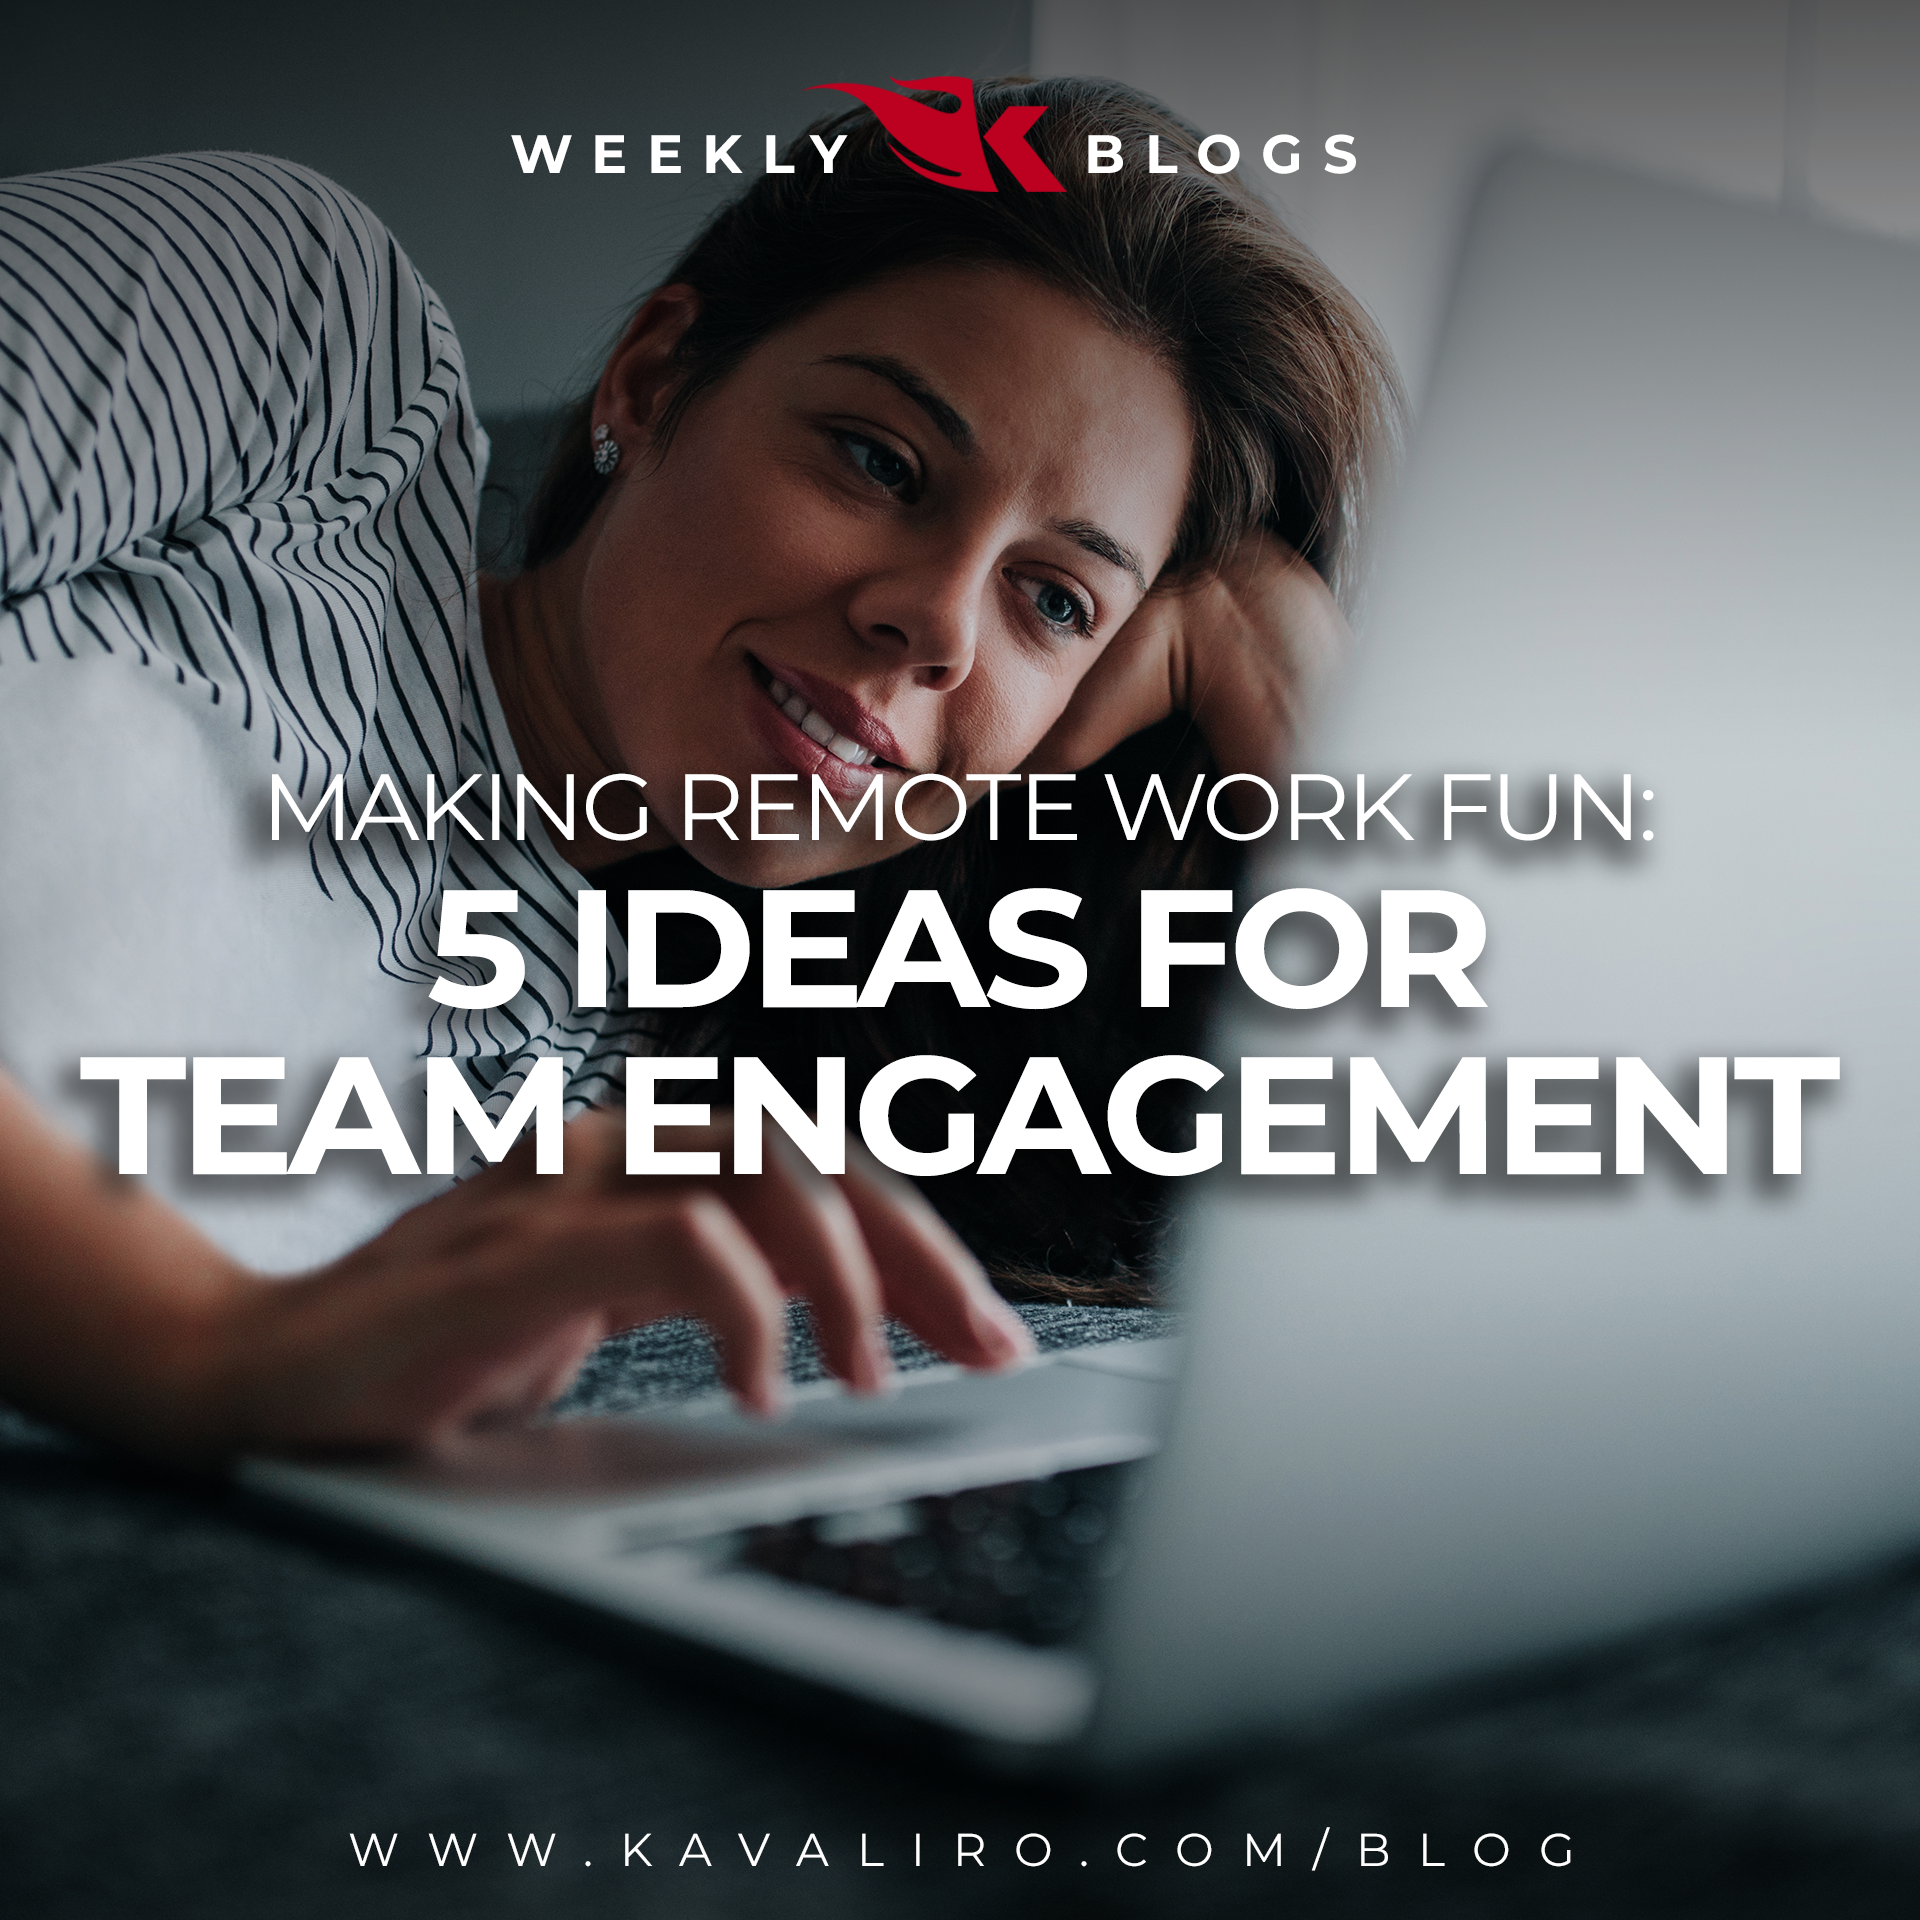 Making Remote Work Fun! : 5 Ideas for Team Engagement